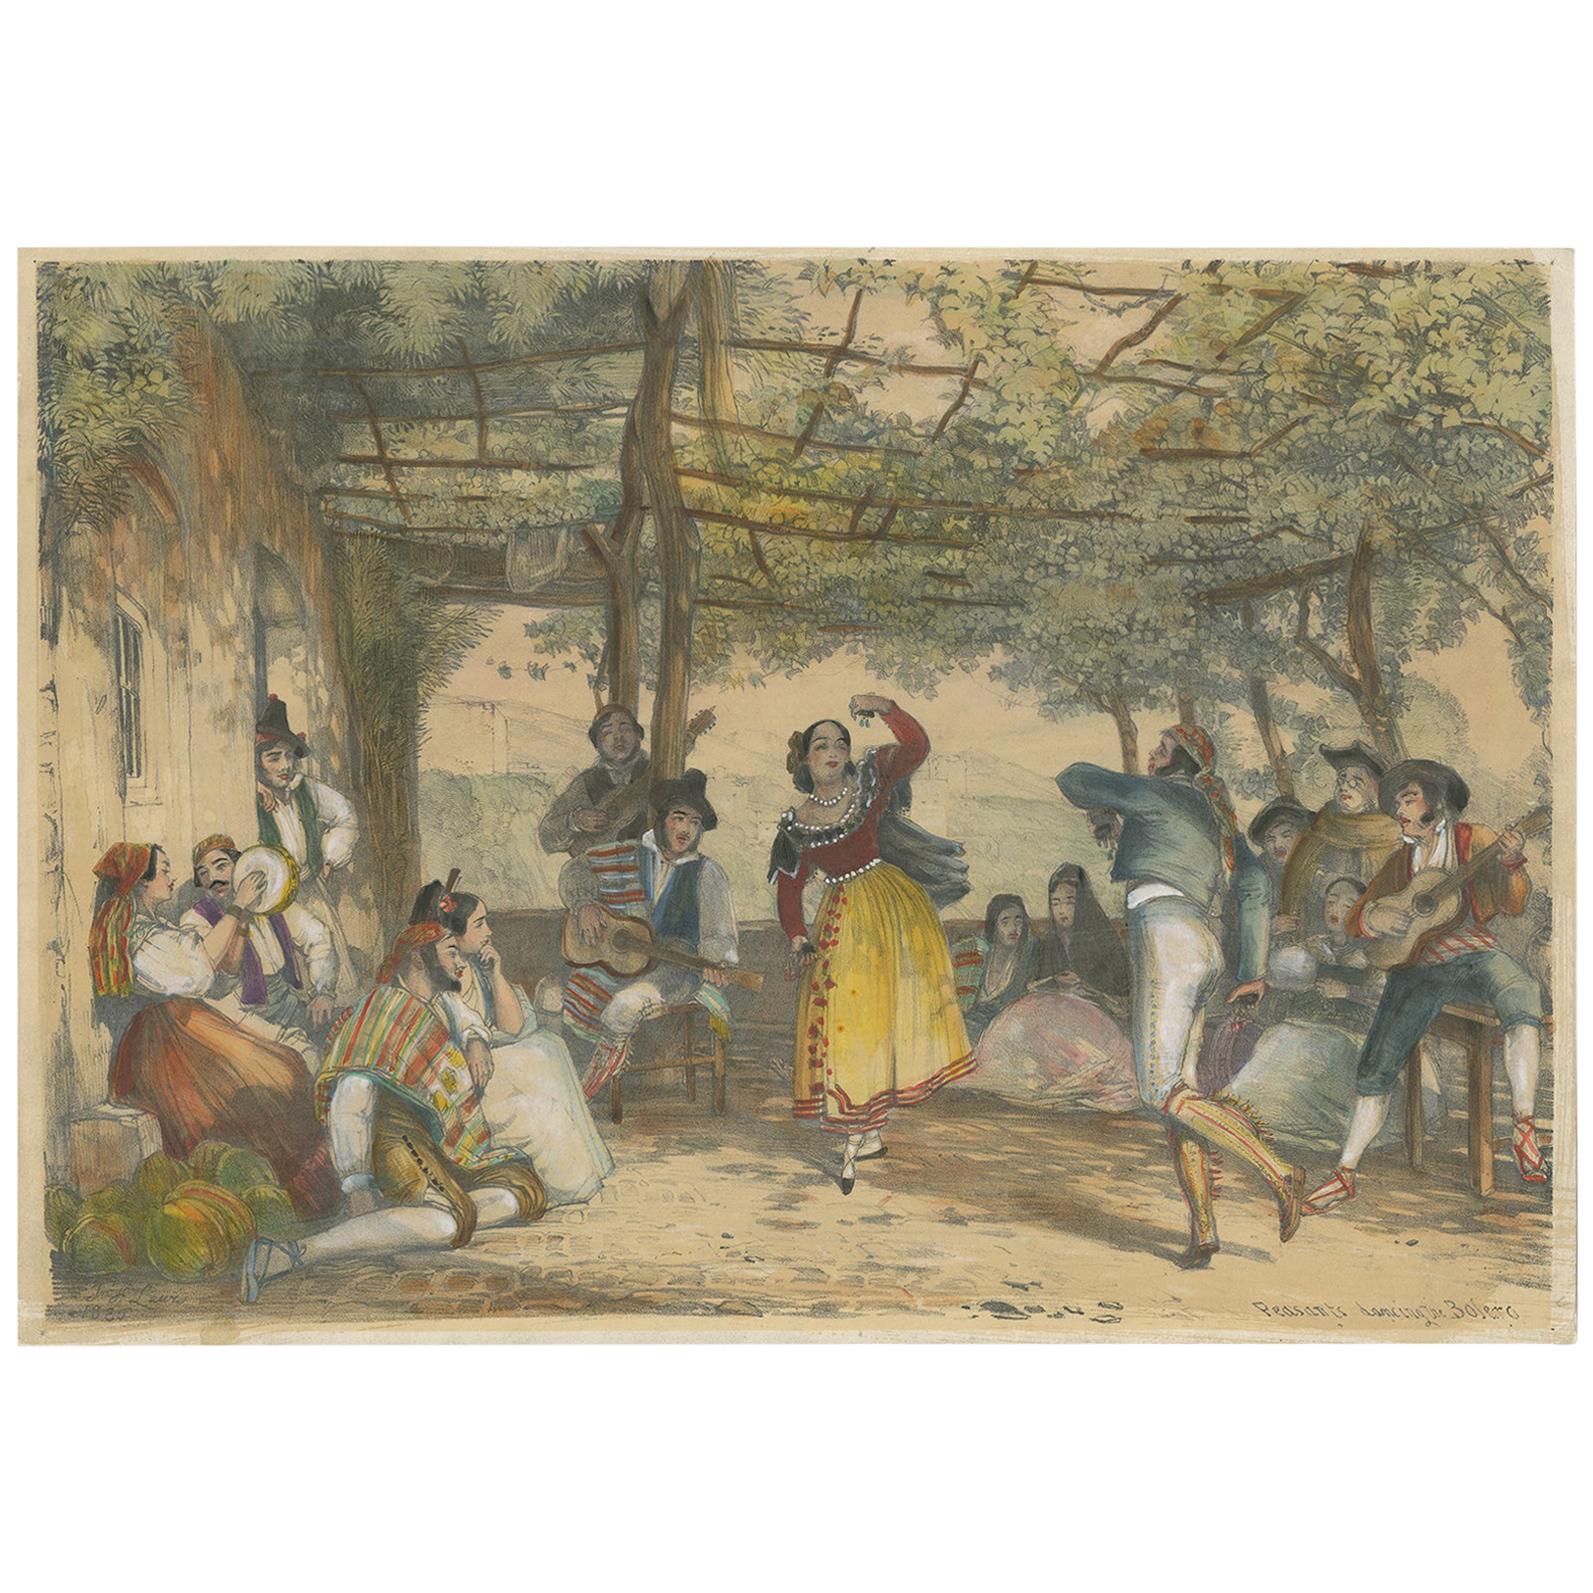 Antique Print of Peasants Dancing the Bolero by Lewis '1836'